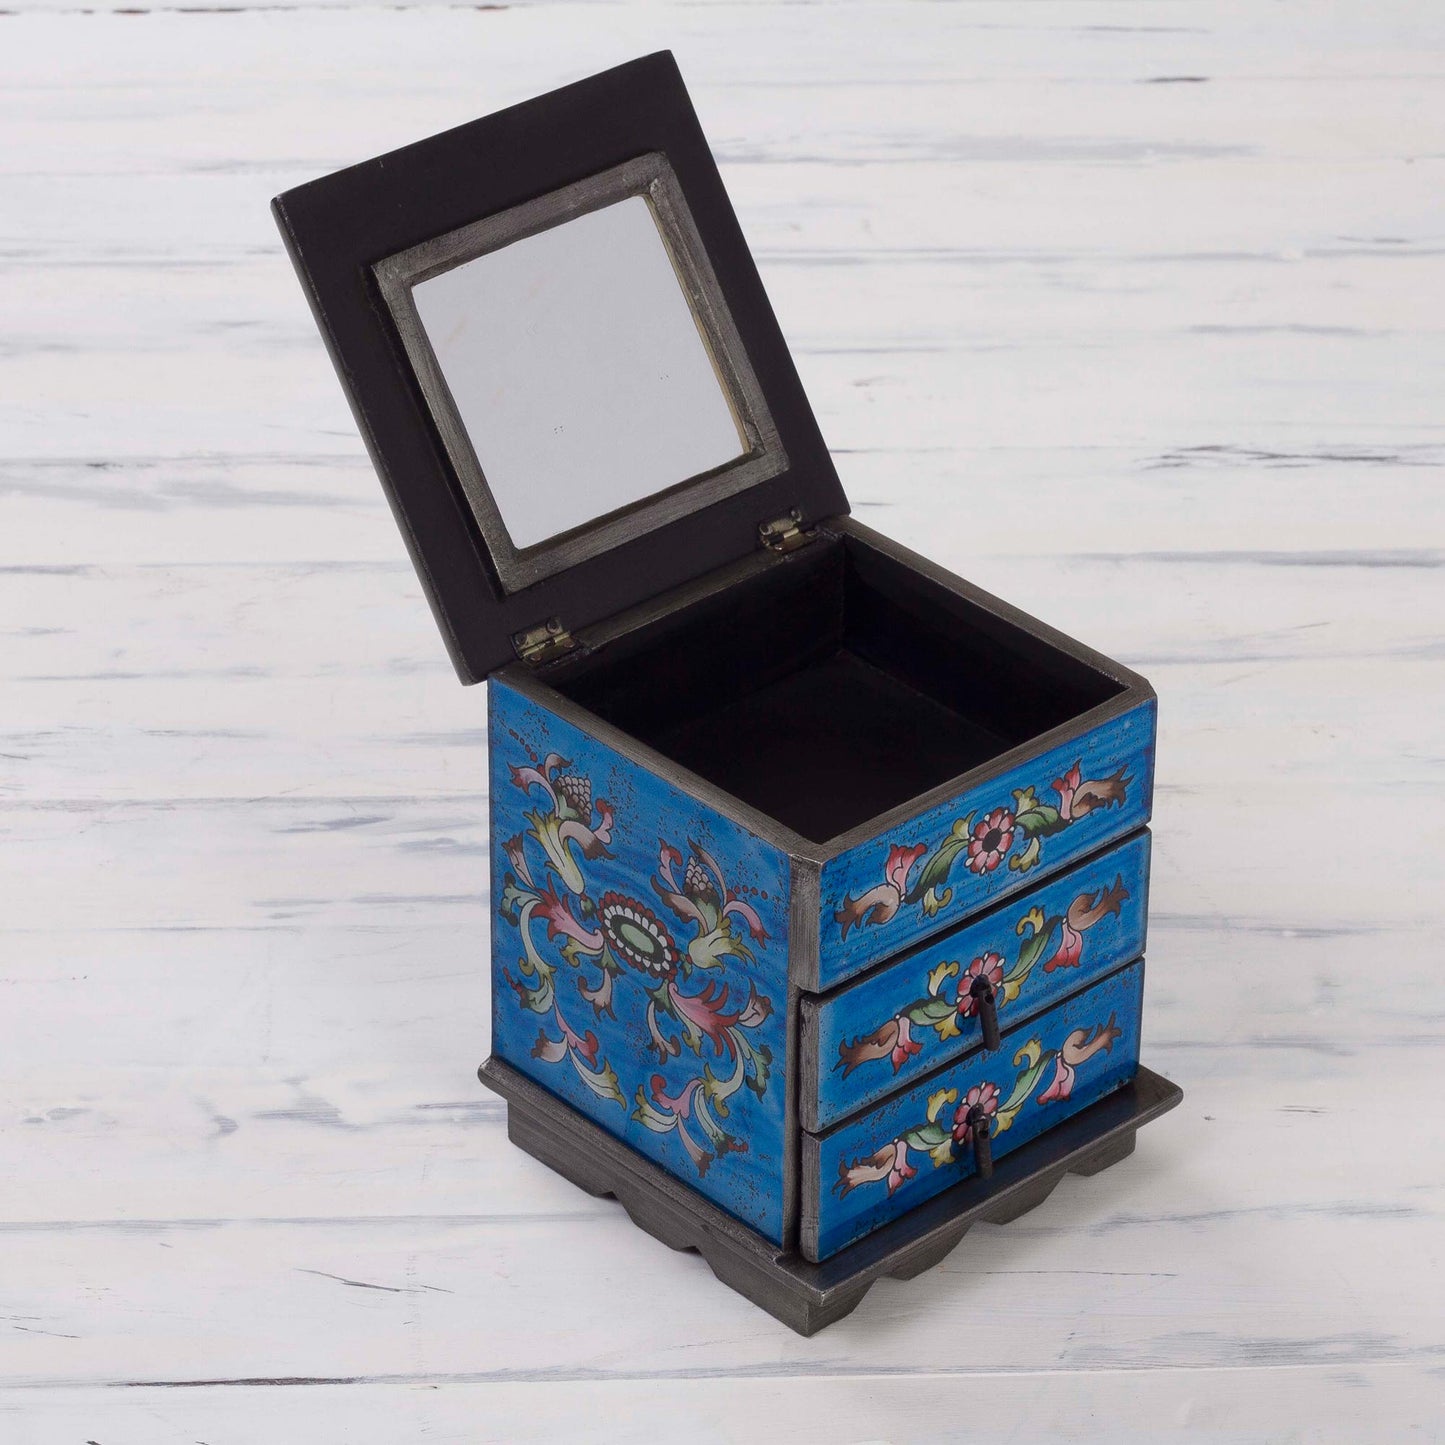 Celestial Blue Reverse Painted Glass Jewelry Box Chest with Mirror